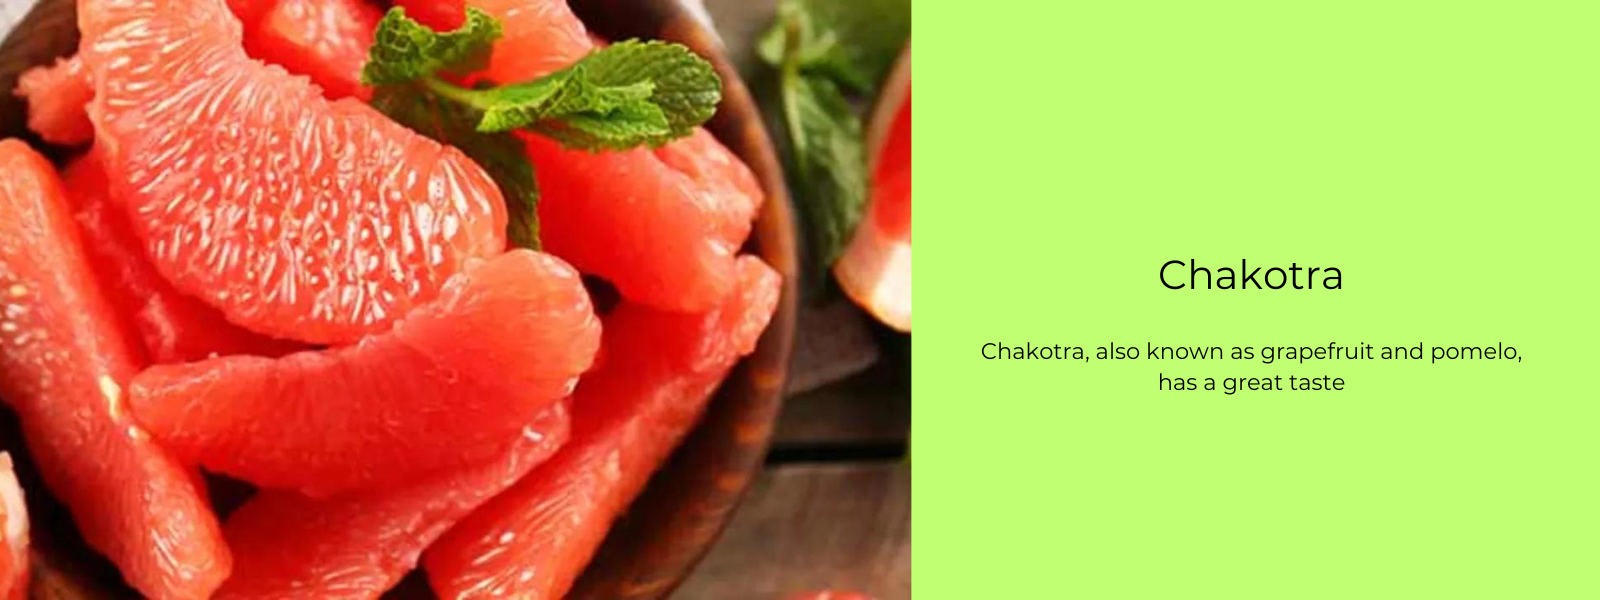 Chakotra – Health Benefits, Uses and Important Facts